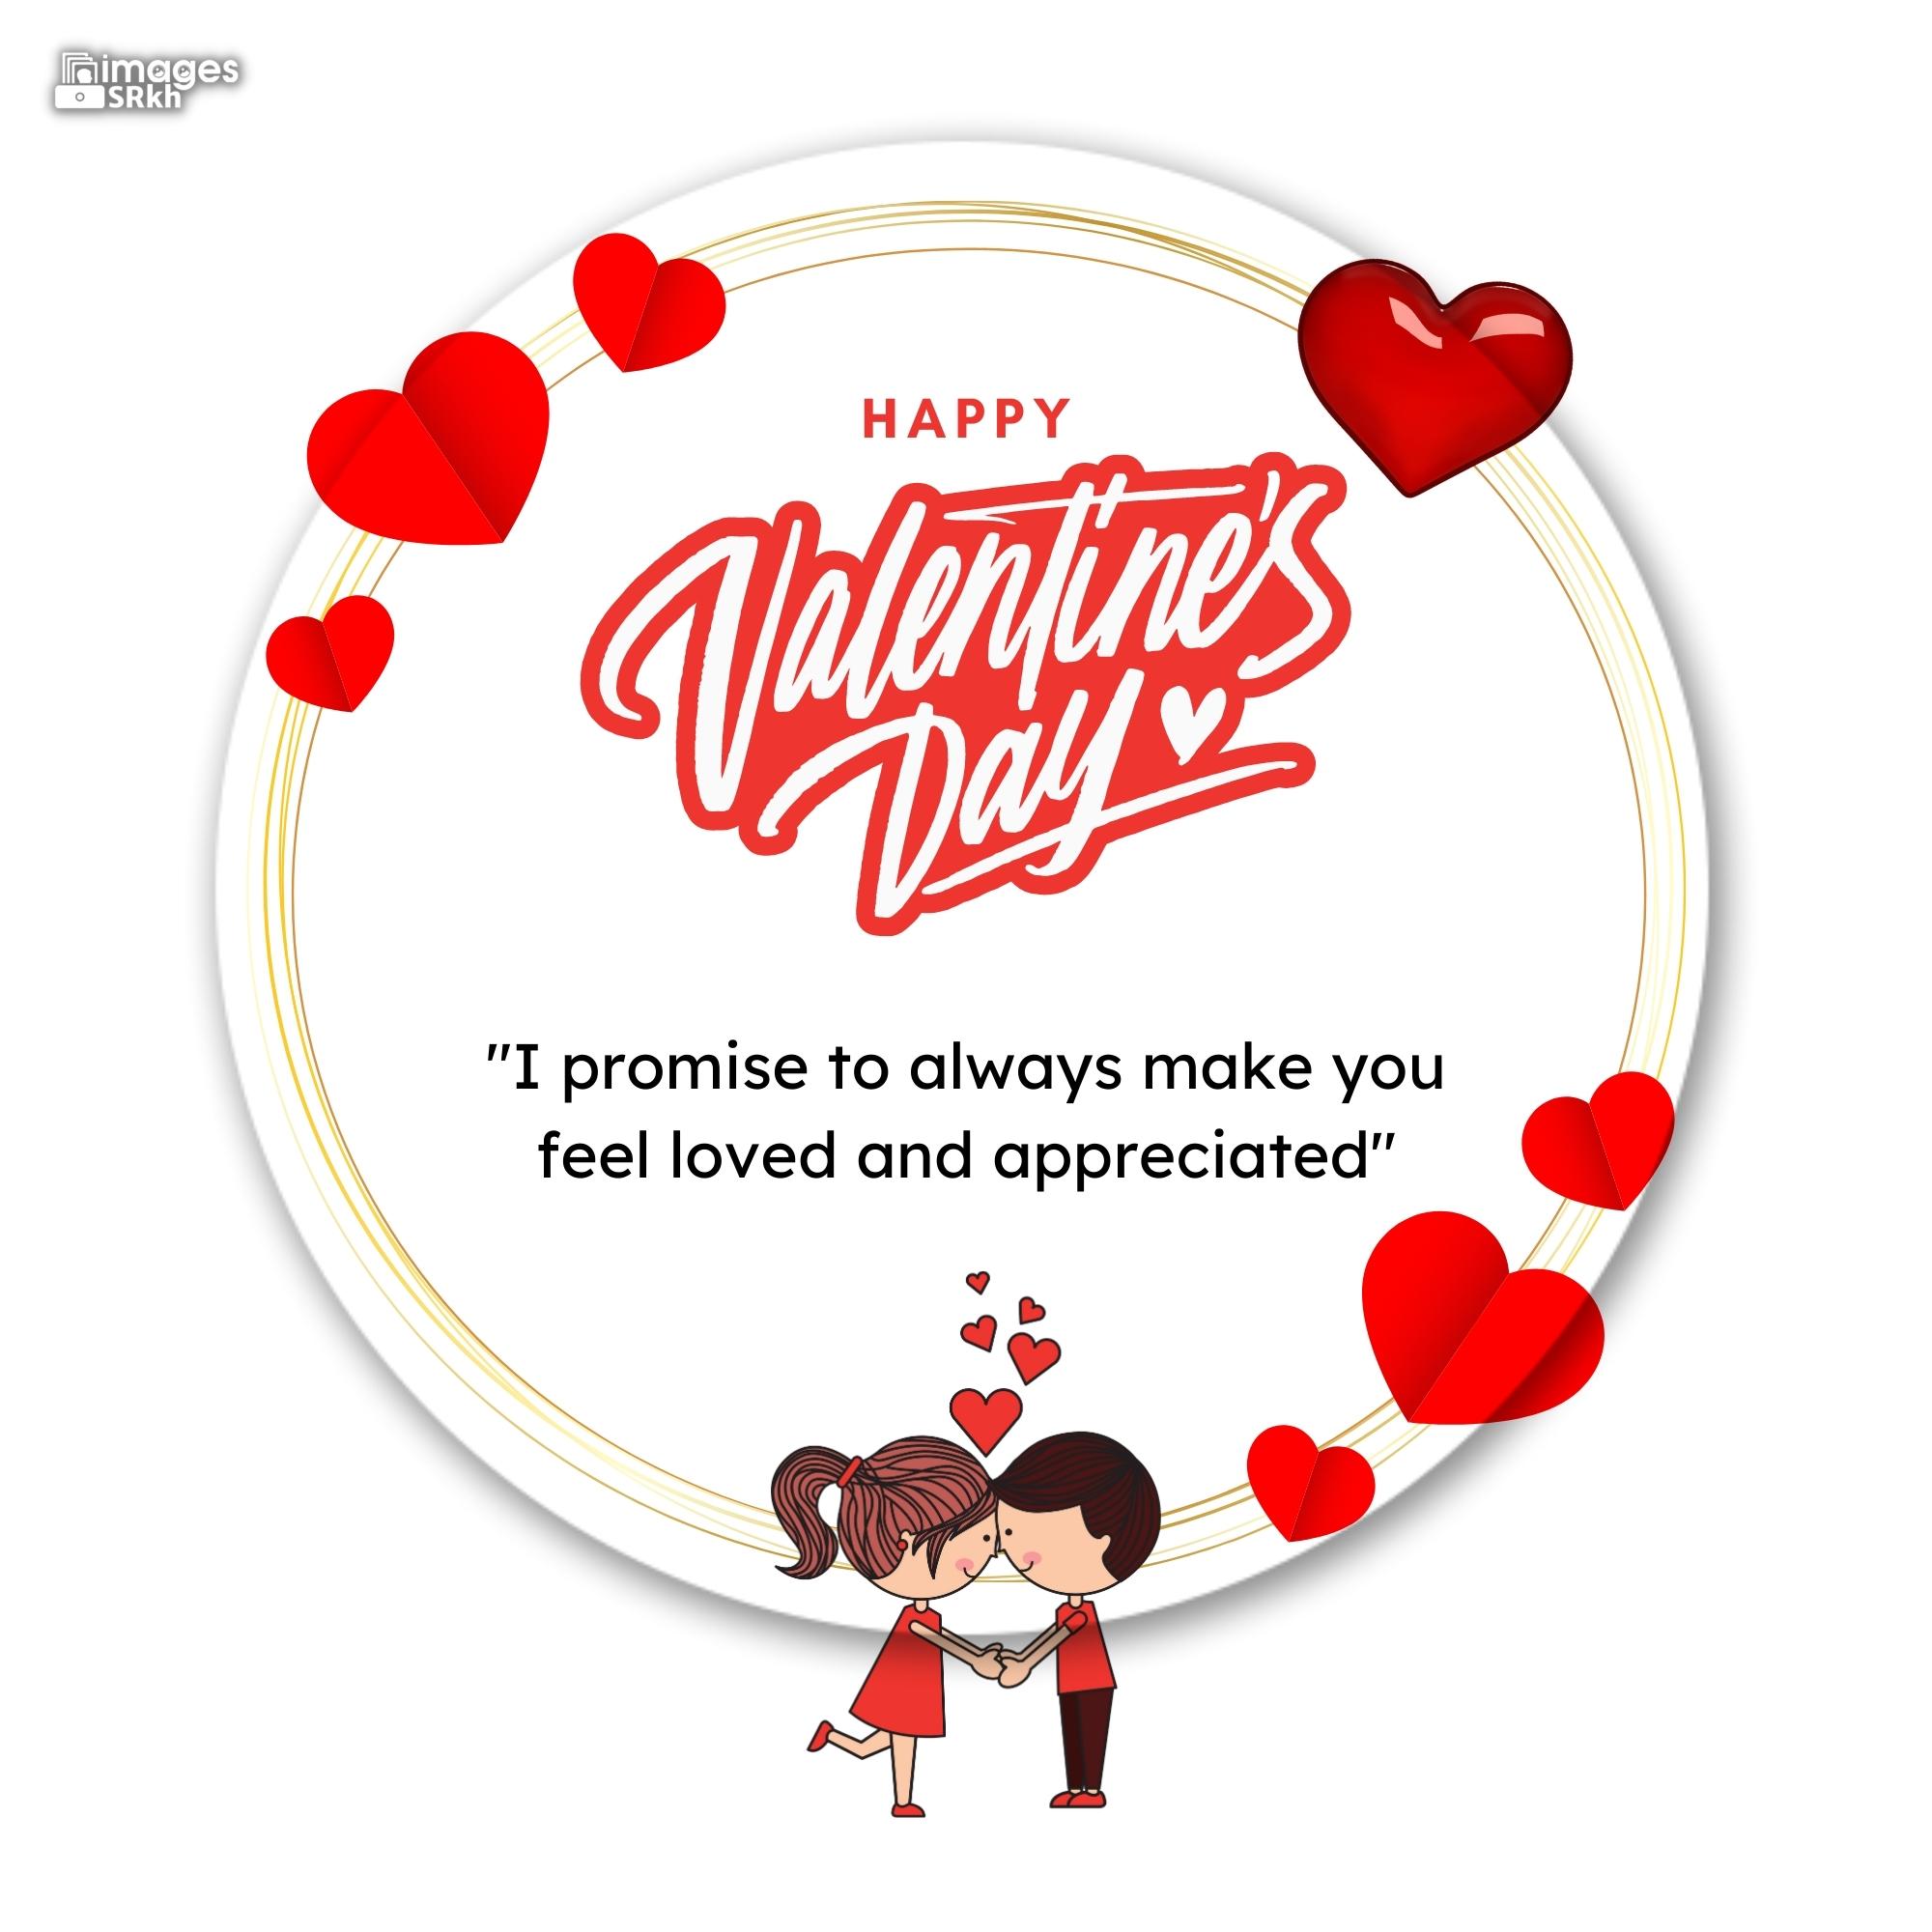 Happy Valentines Day | 509 | PREMIUM IMAGES | Wishes for Love